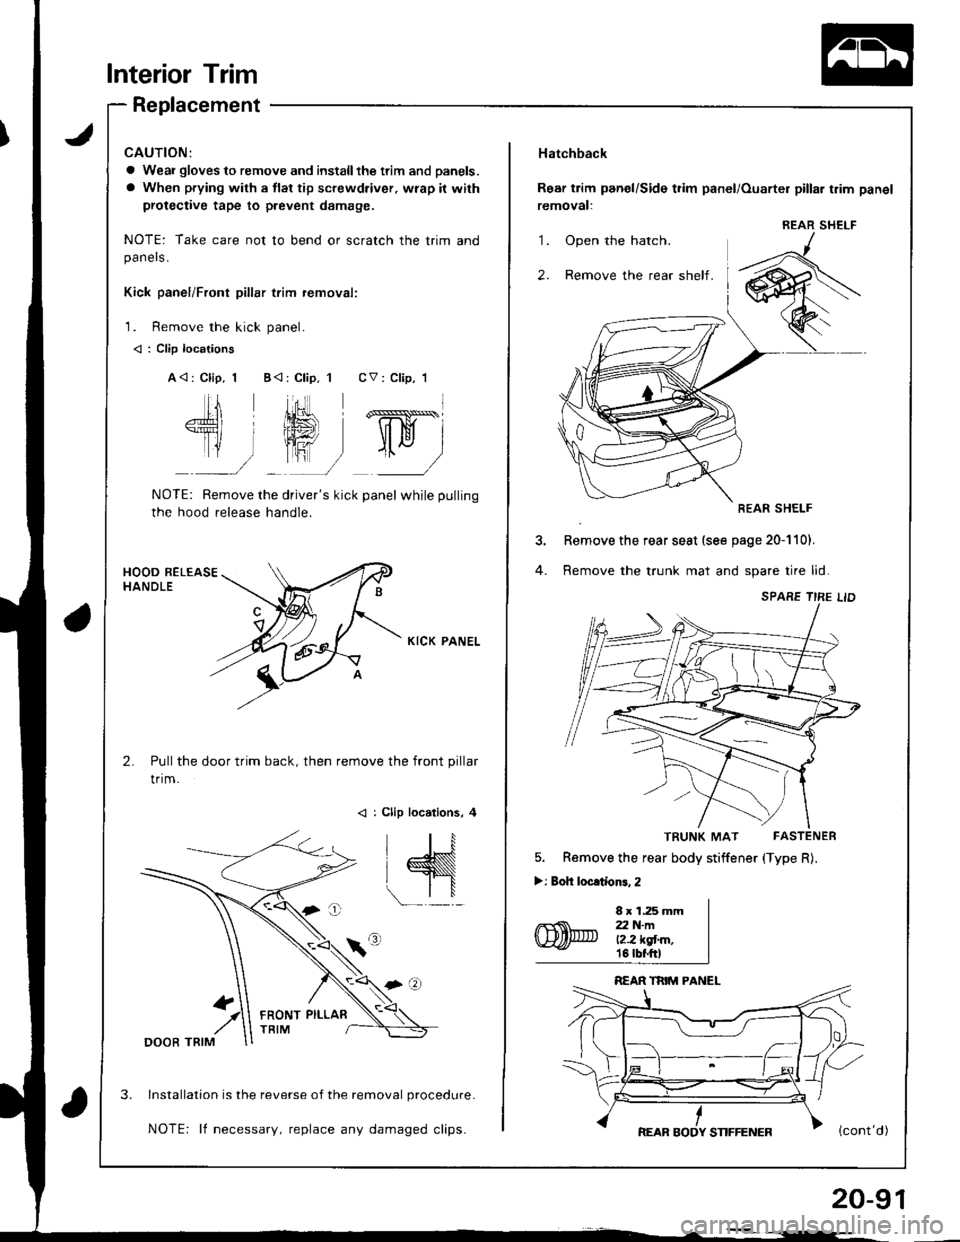 HONDA INTEGRA 1998 4.G Workshop Manual Interior Trim
Replacement
a Weai gloves to remove and installthe ttim and panels.
a When prying with a flat tip screwdriver, wrap it with
protective tape to prevent damage.
NOTE: Take care not to bend